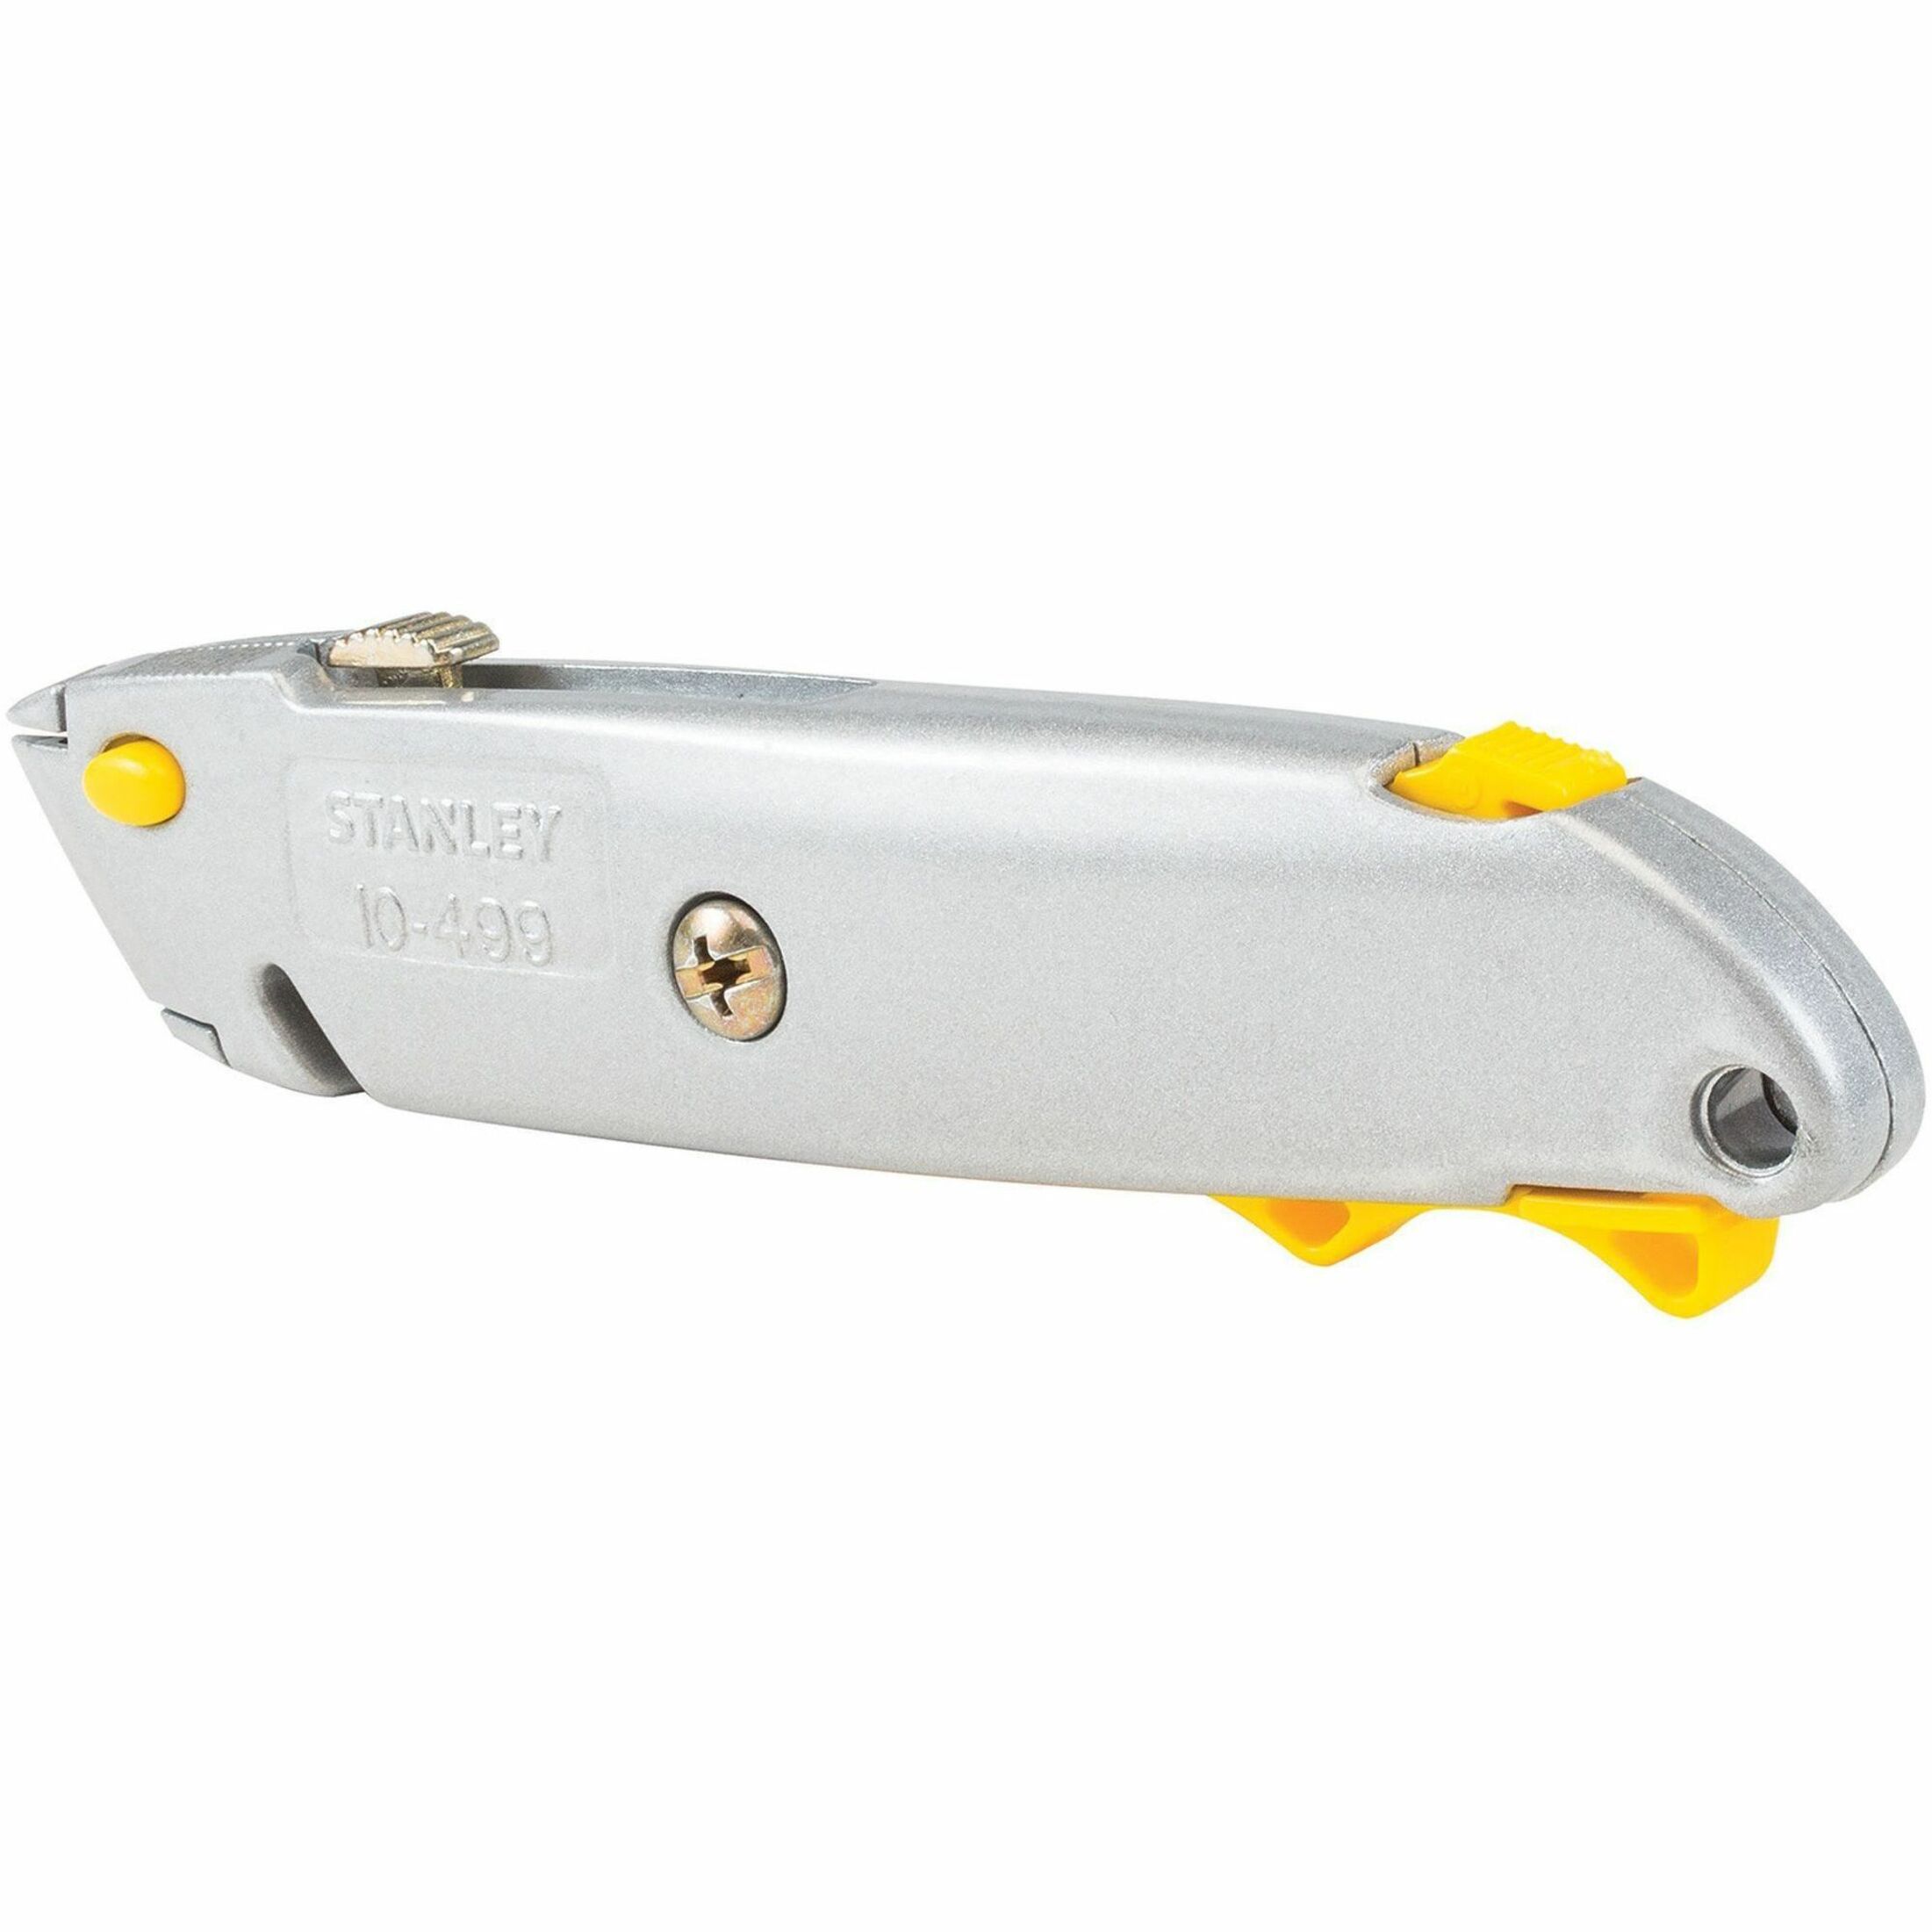 Stanley, BOS10499, Quick-Change Utility Knife, 1 Each, Black,Silver - image 4 of 4